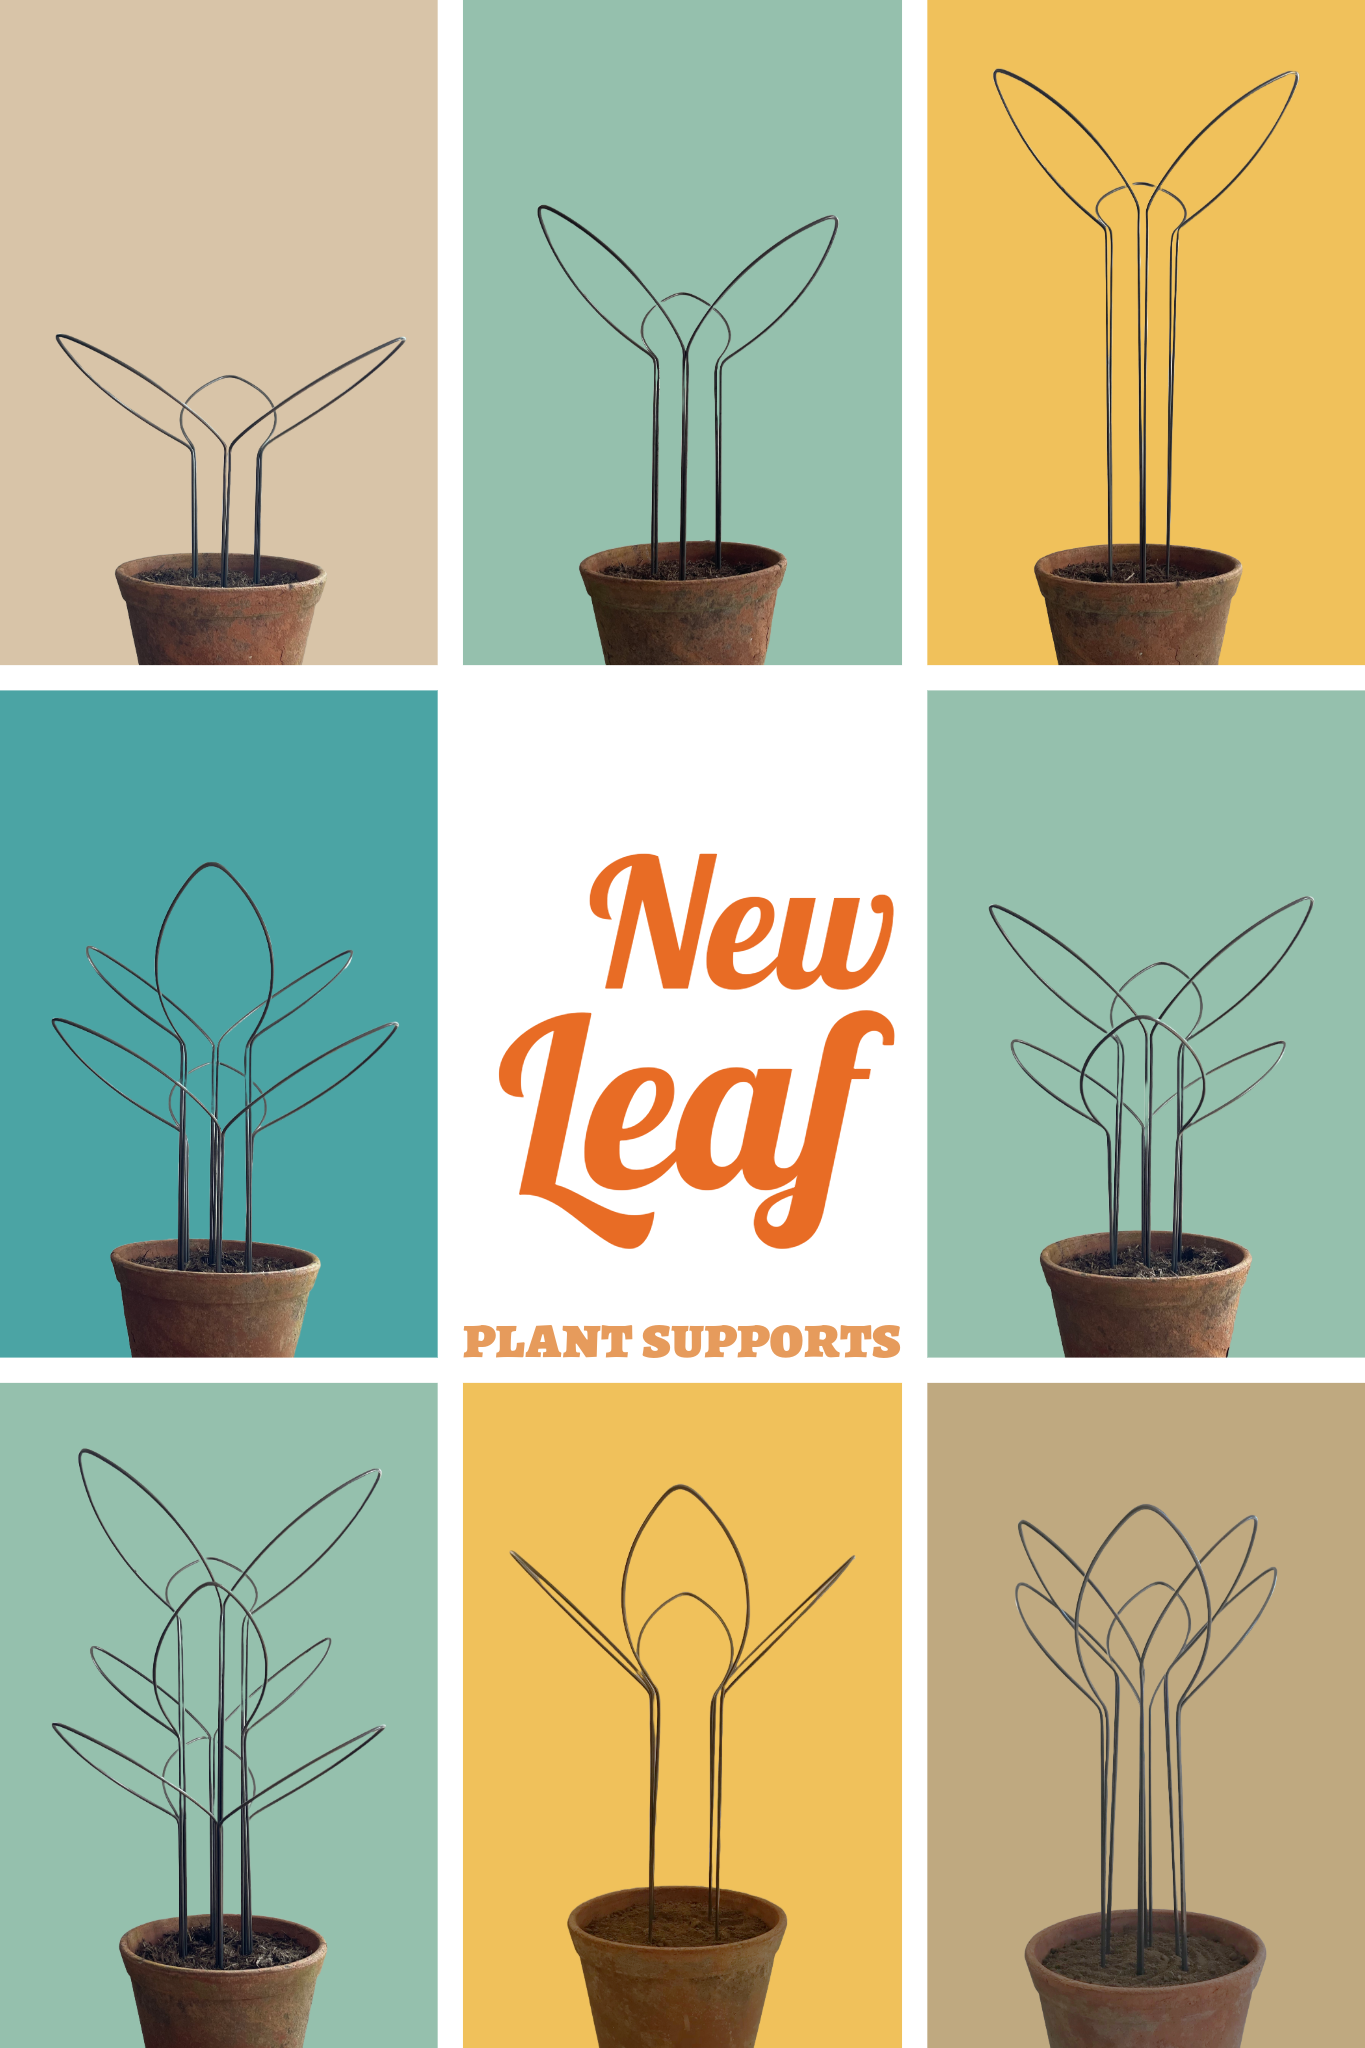 A NEW Leaf - Plant Support